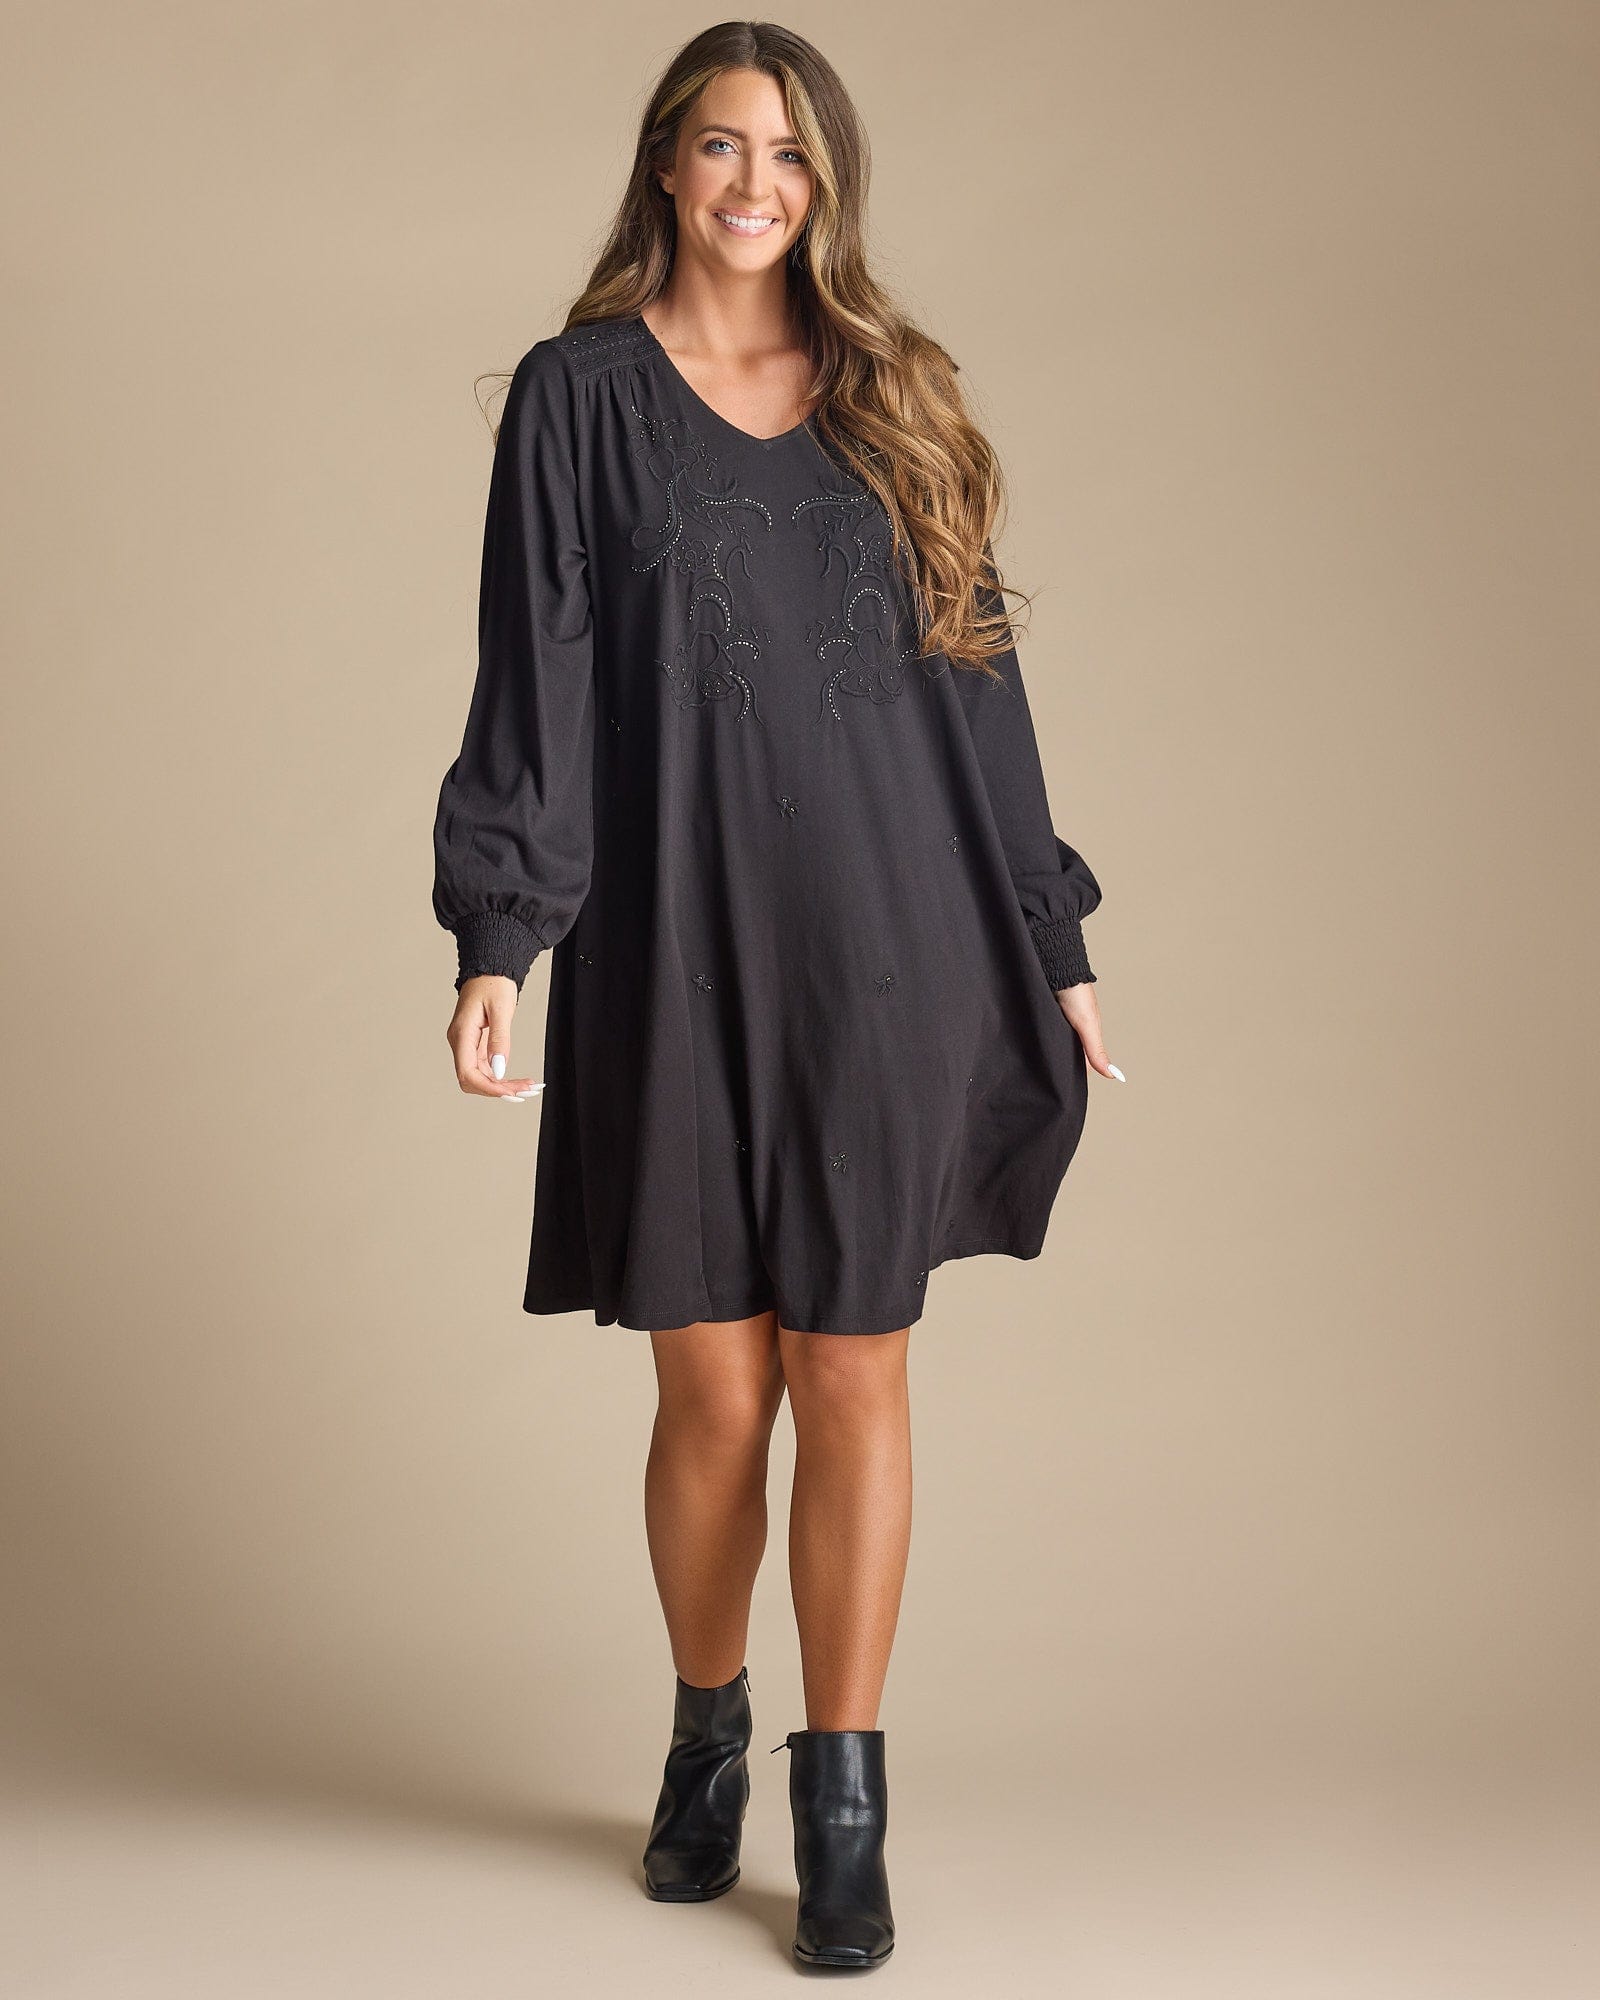 Woman in a long sleeve, knee-length, black dress with beaded front